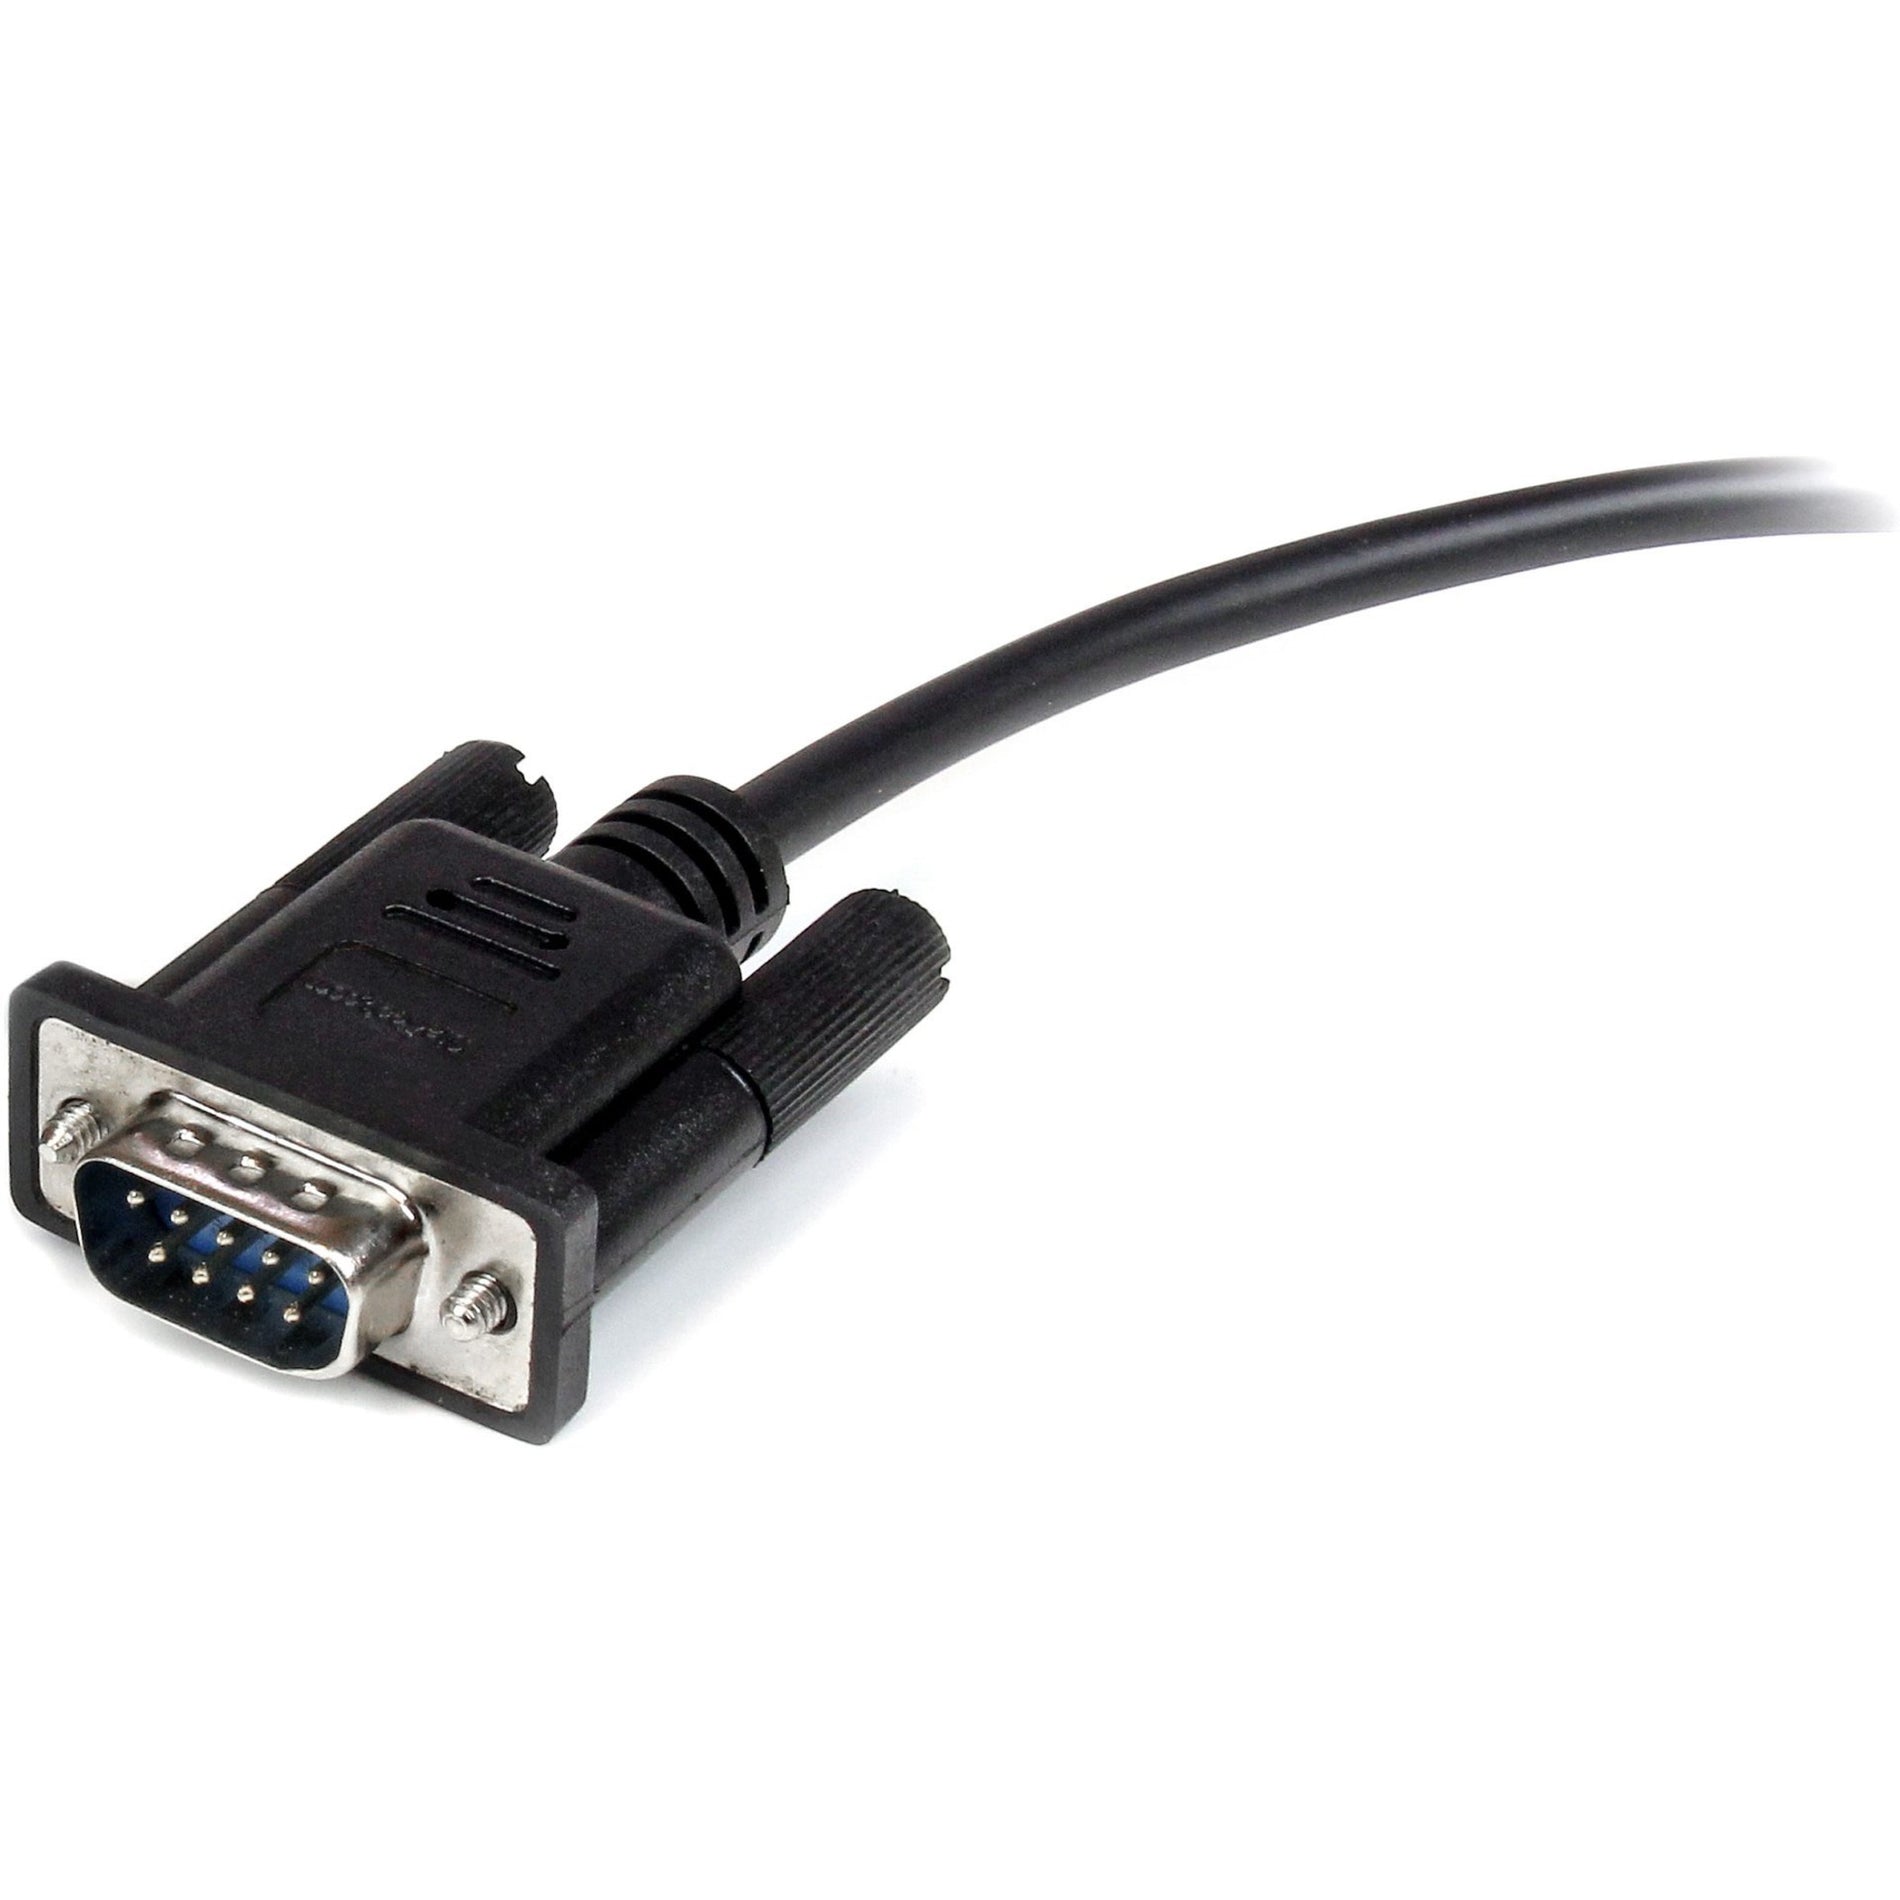 StarTech.com MXT10050CMBK 0.5m Black Straight Through DB9 RS232 Serial Cable - M/F, Molded, EMI Protection, Lifetime Warranty